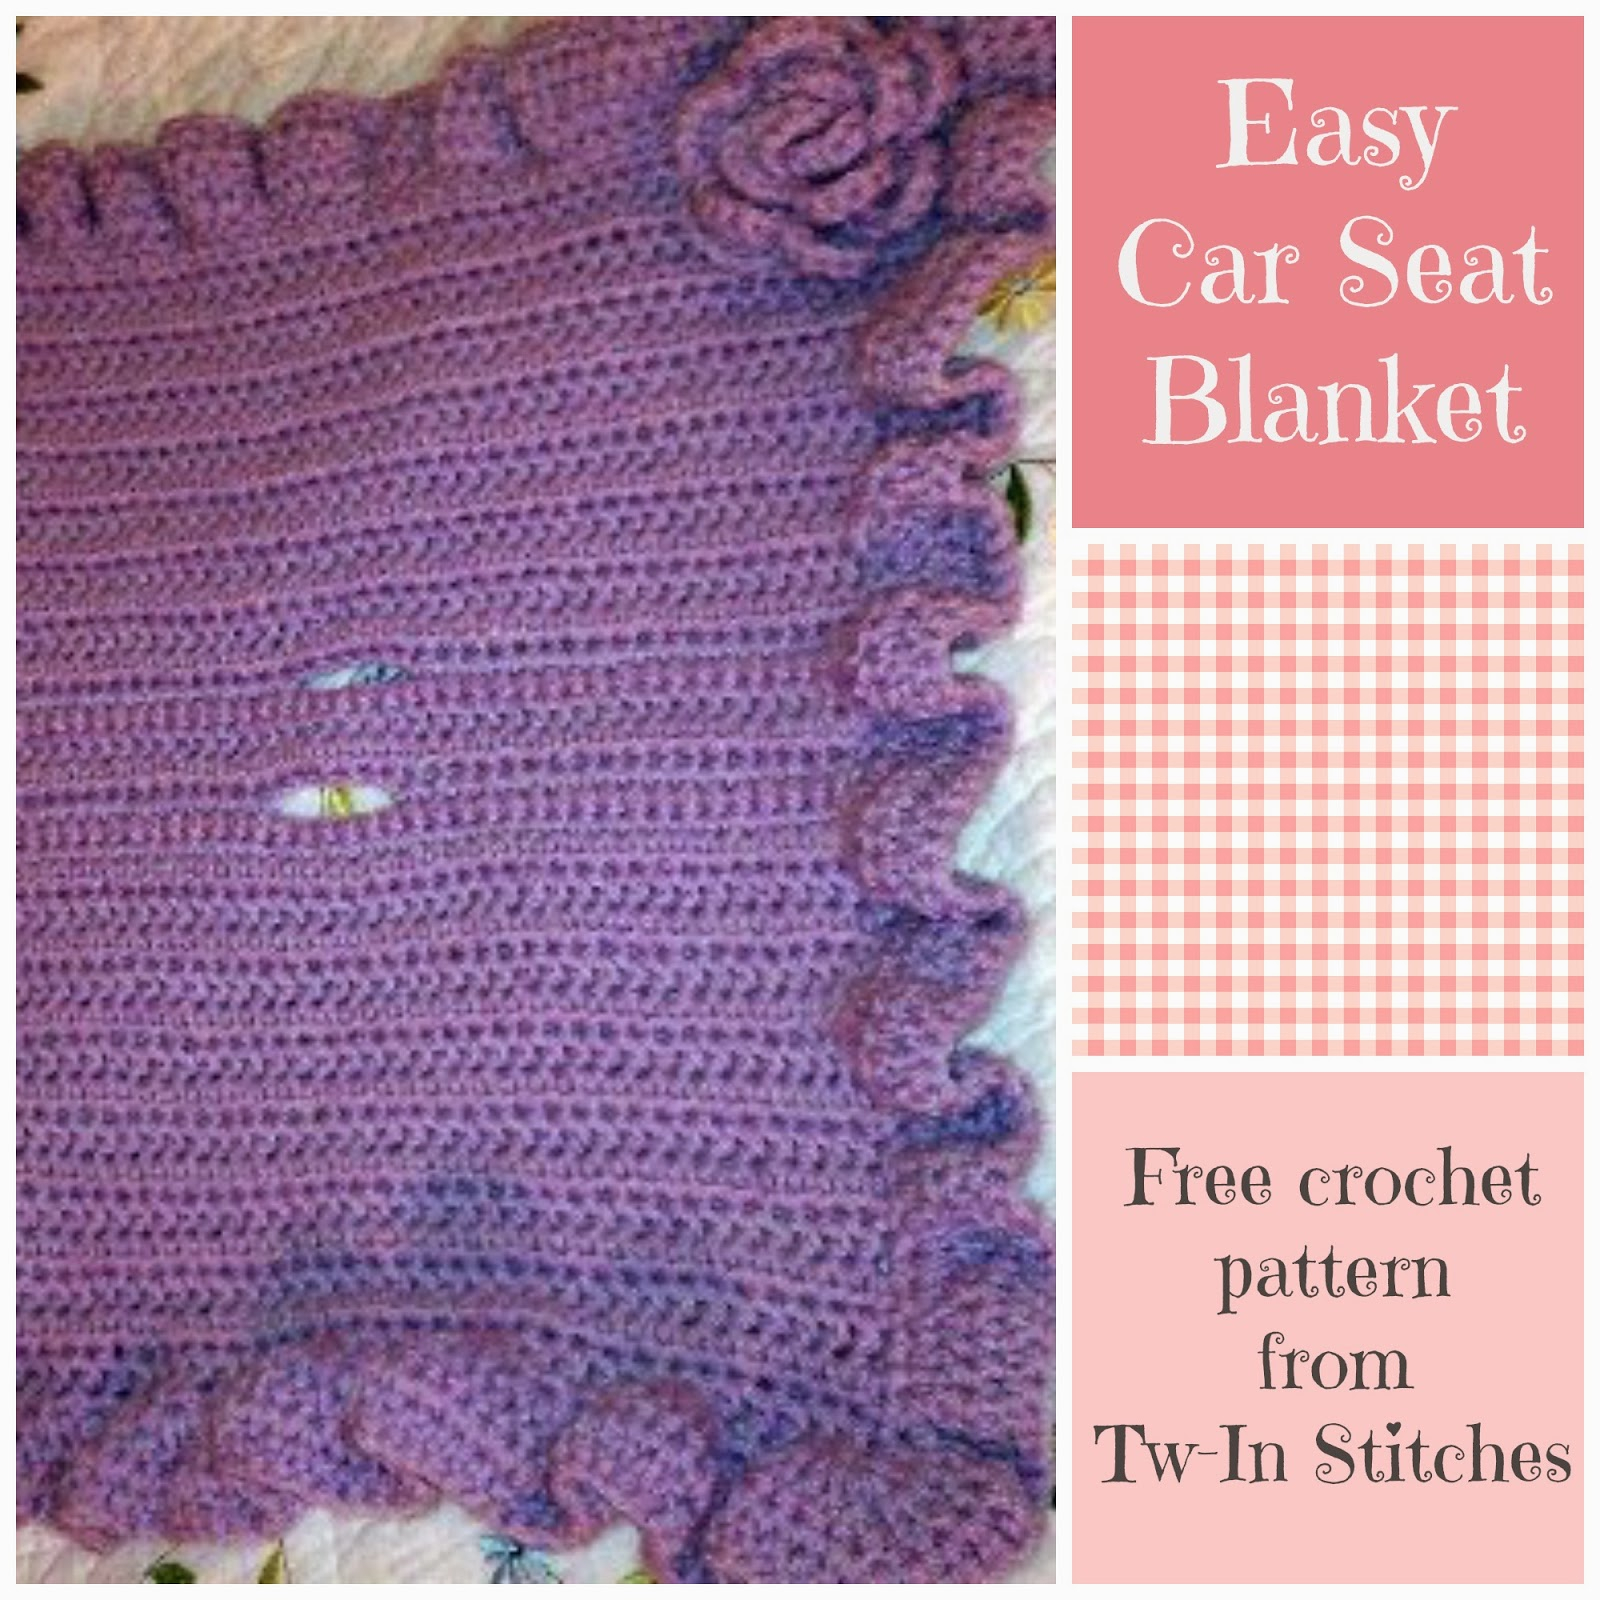 Car Seat Knitted Blanket Pattern Tw In Stitches Easy Car Seat Blanket Pattern Free Pattern